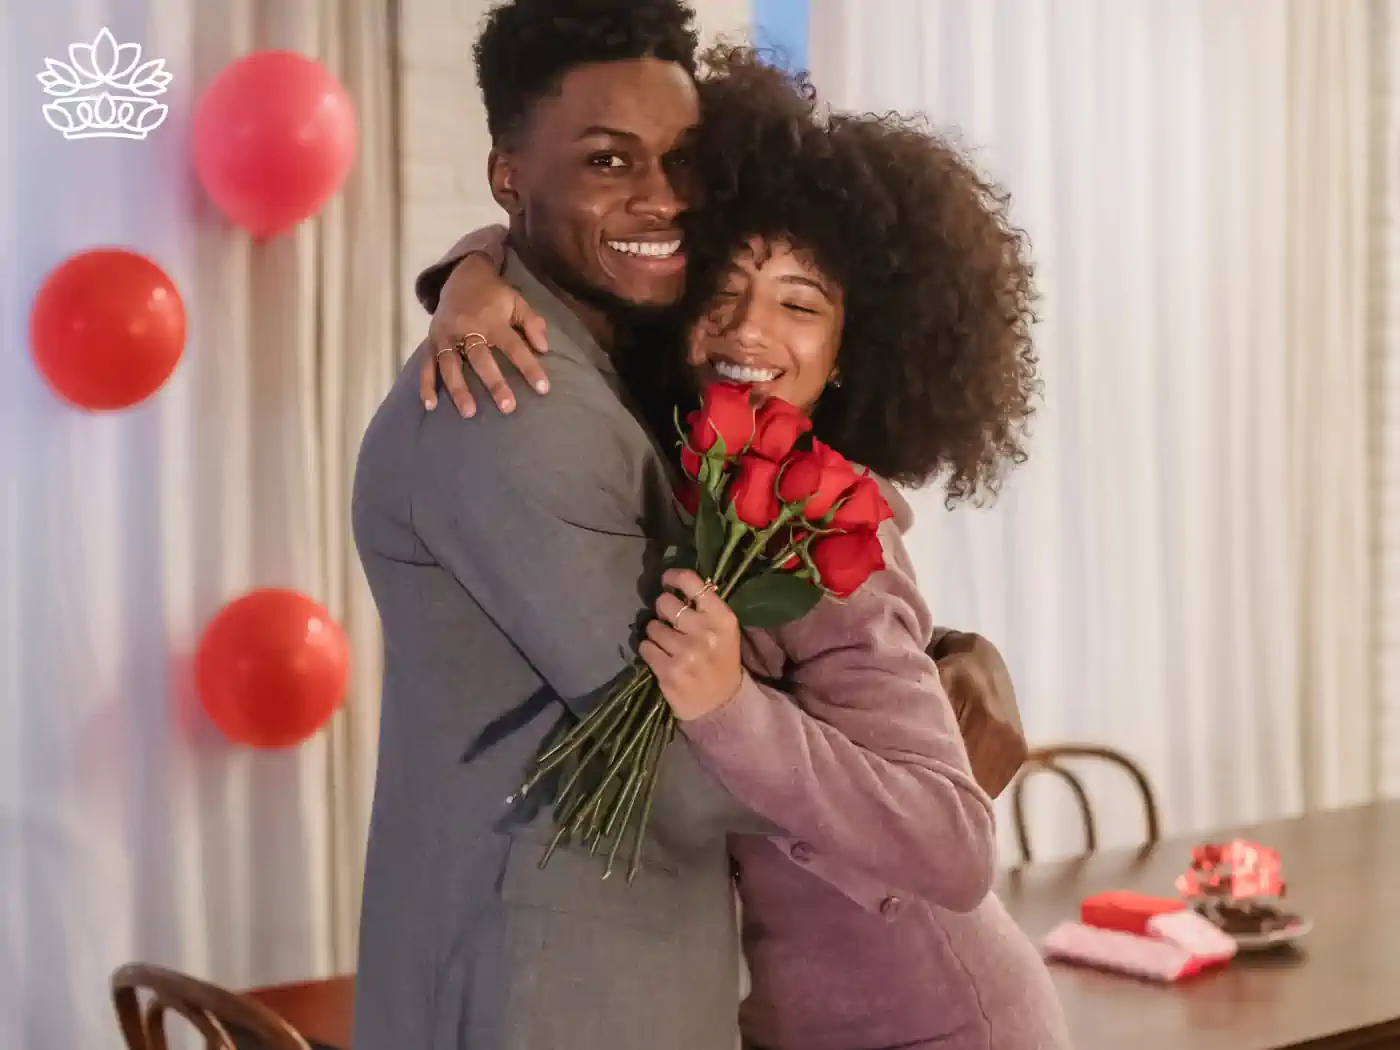 A joyful embrace between a couple as the woman receives a bouquet of red roses, with red balloons and Valentine's decor in the background. Fabulous Flowers and Gifts delivered with heart. Valentine's Day Flowers.